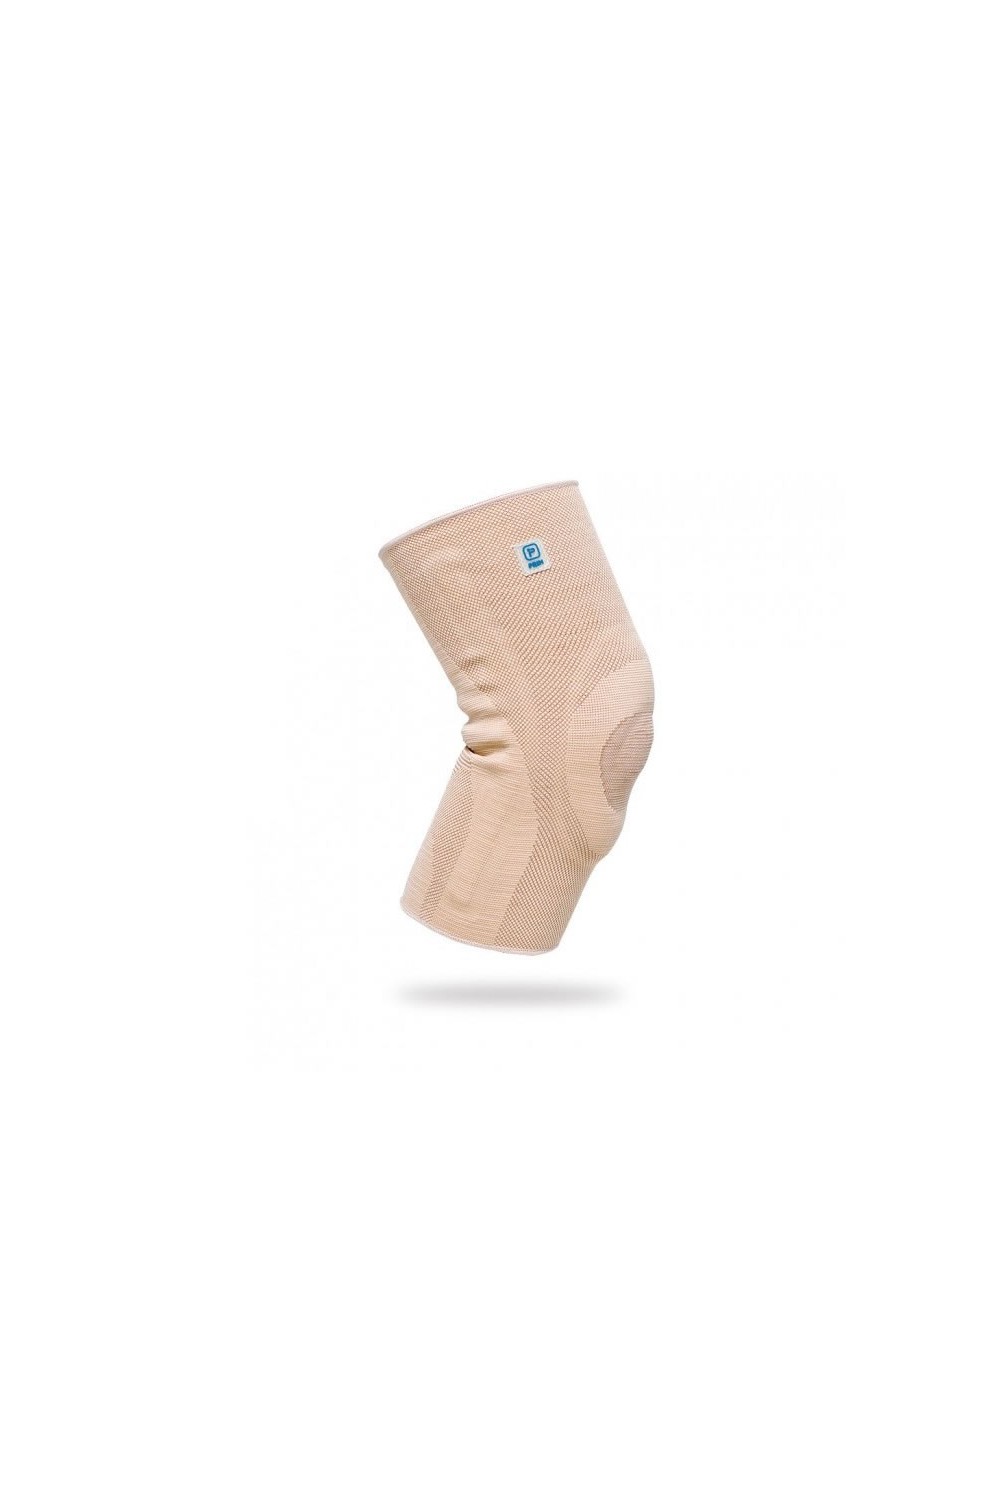 PRIM - Elastic Knee Brace with Silicone Pad and Side Stabilisers S.M